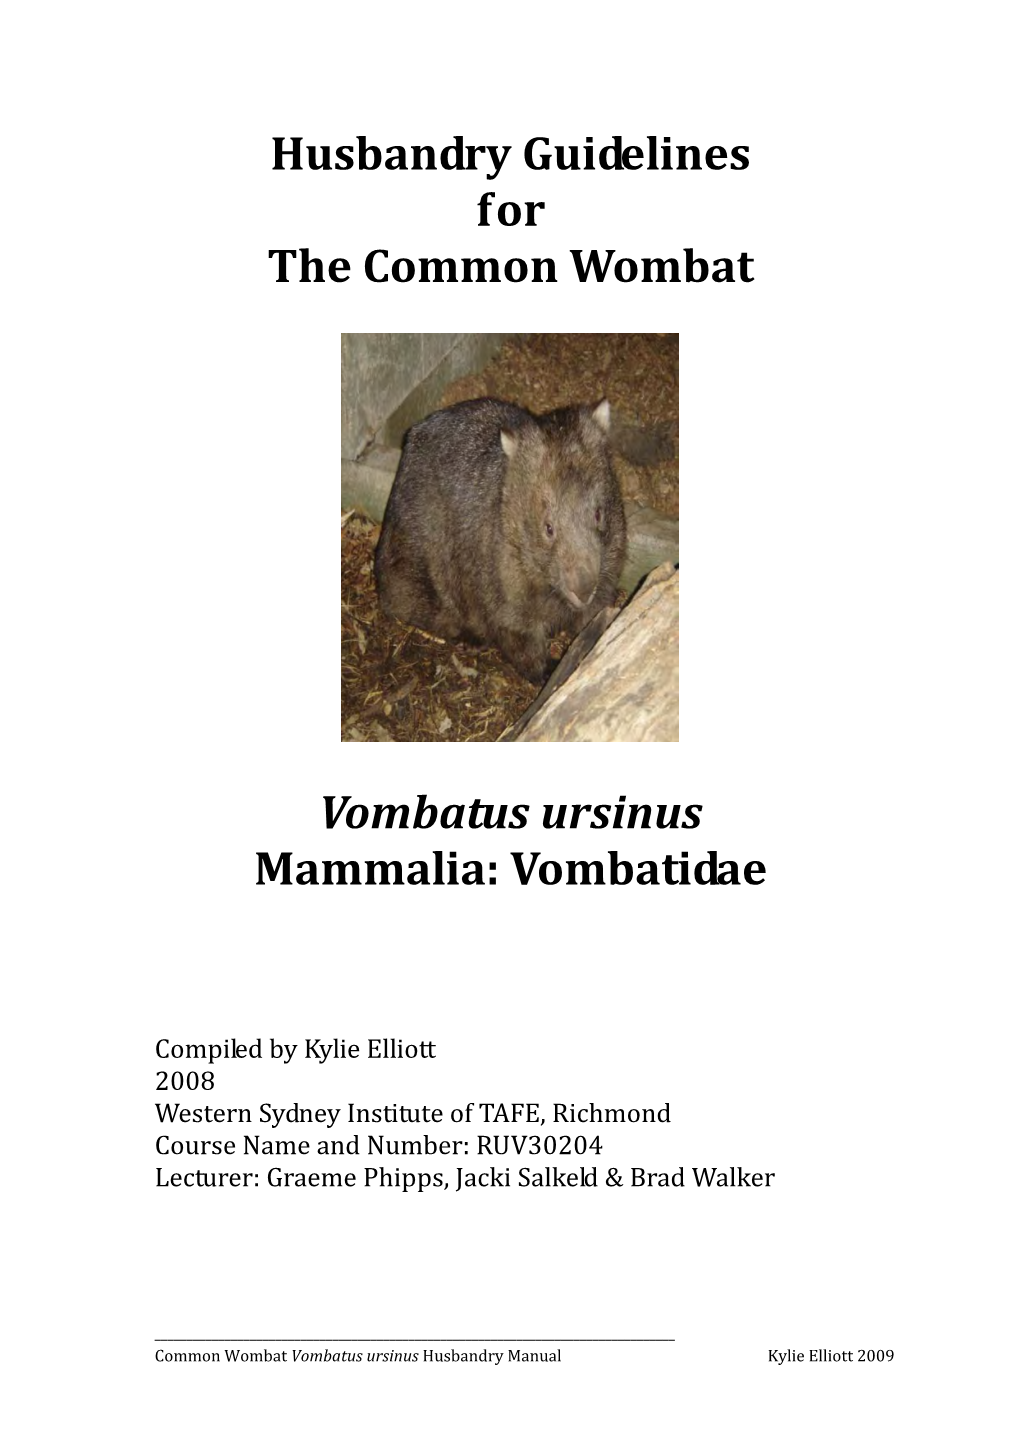 Husbandry Guidelines for the Common Wombat Vombatus